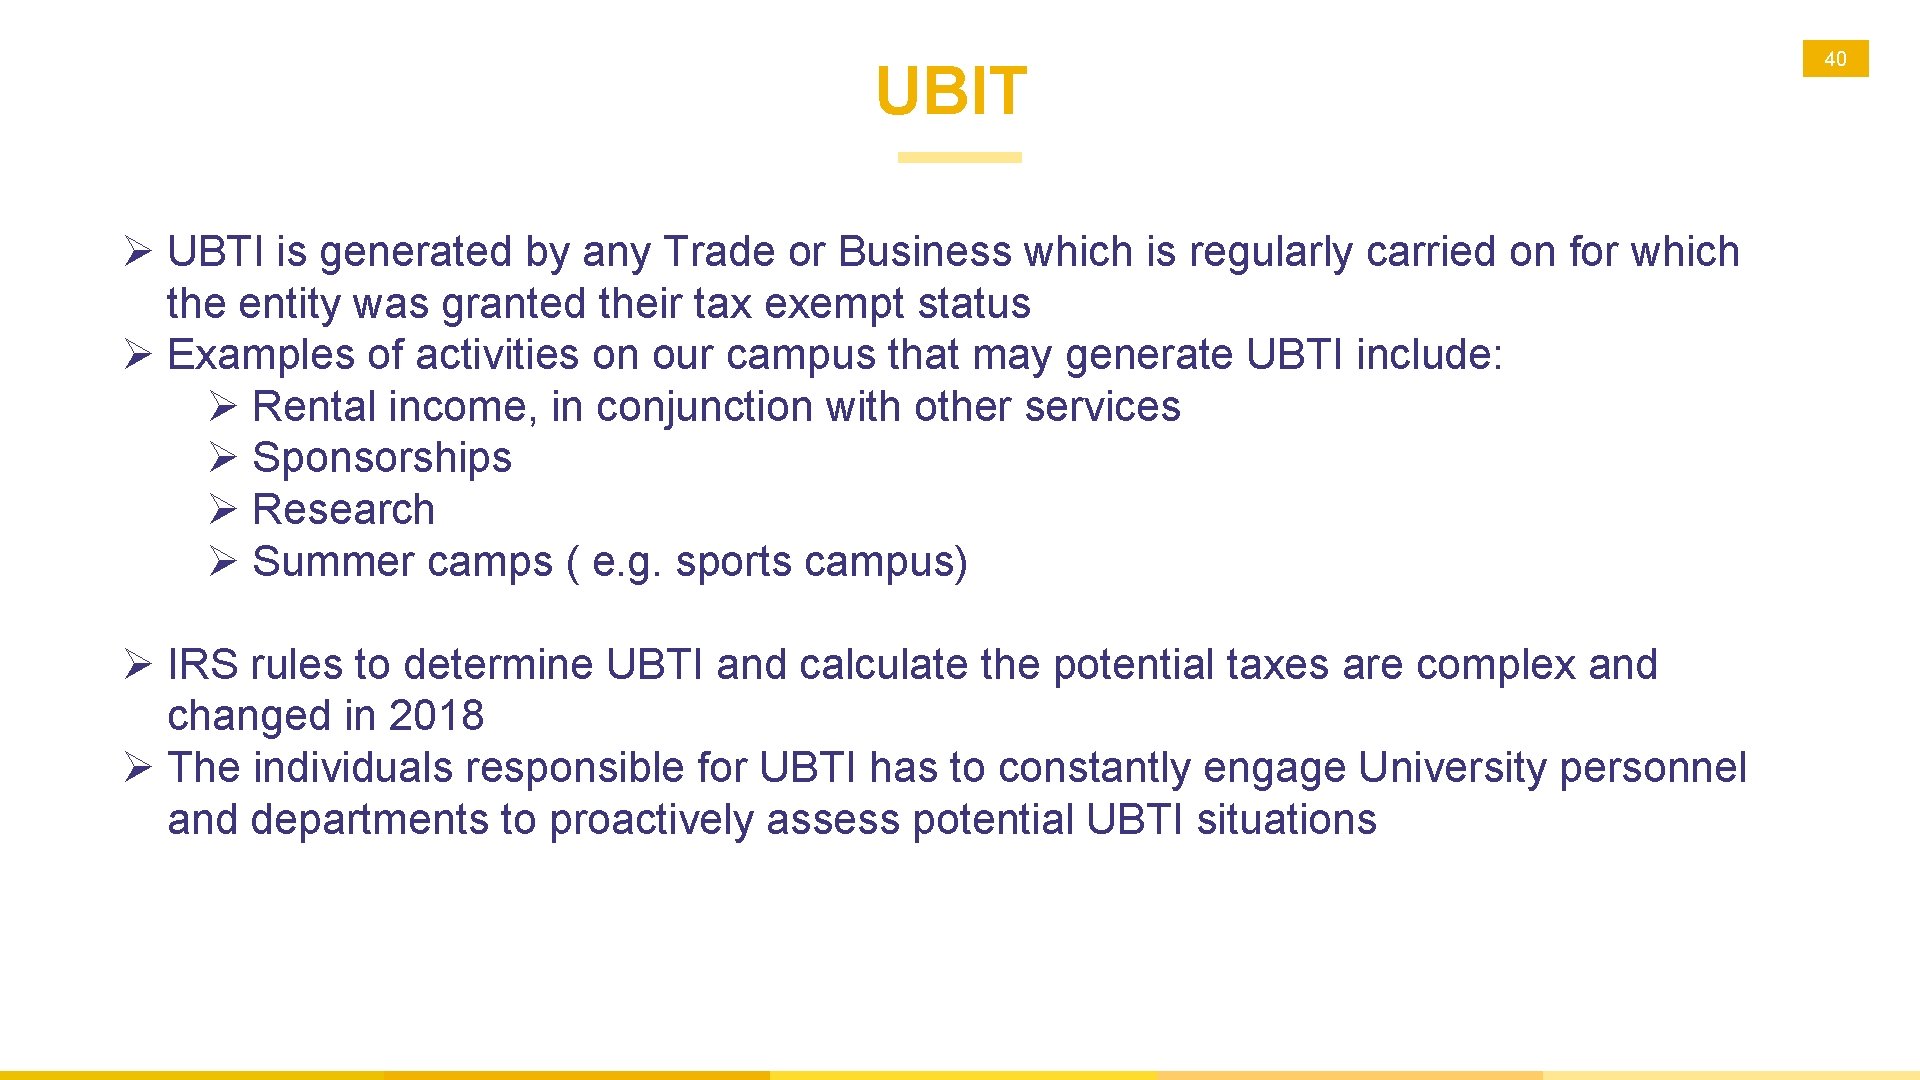 UBIT Ø UBTI is generated by any Trade or Business which is regularly carried